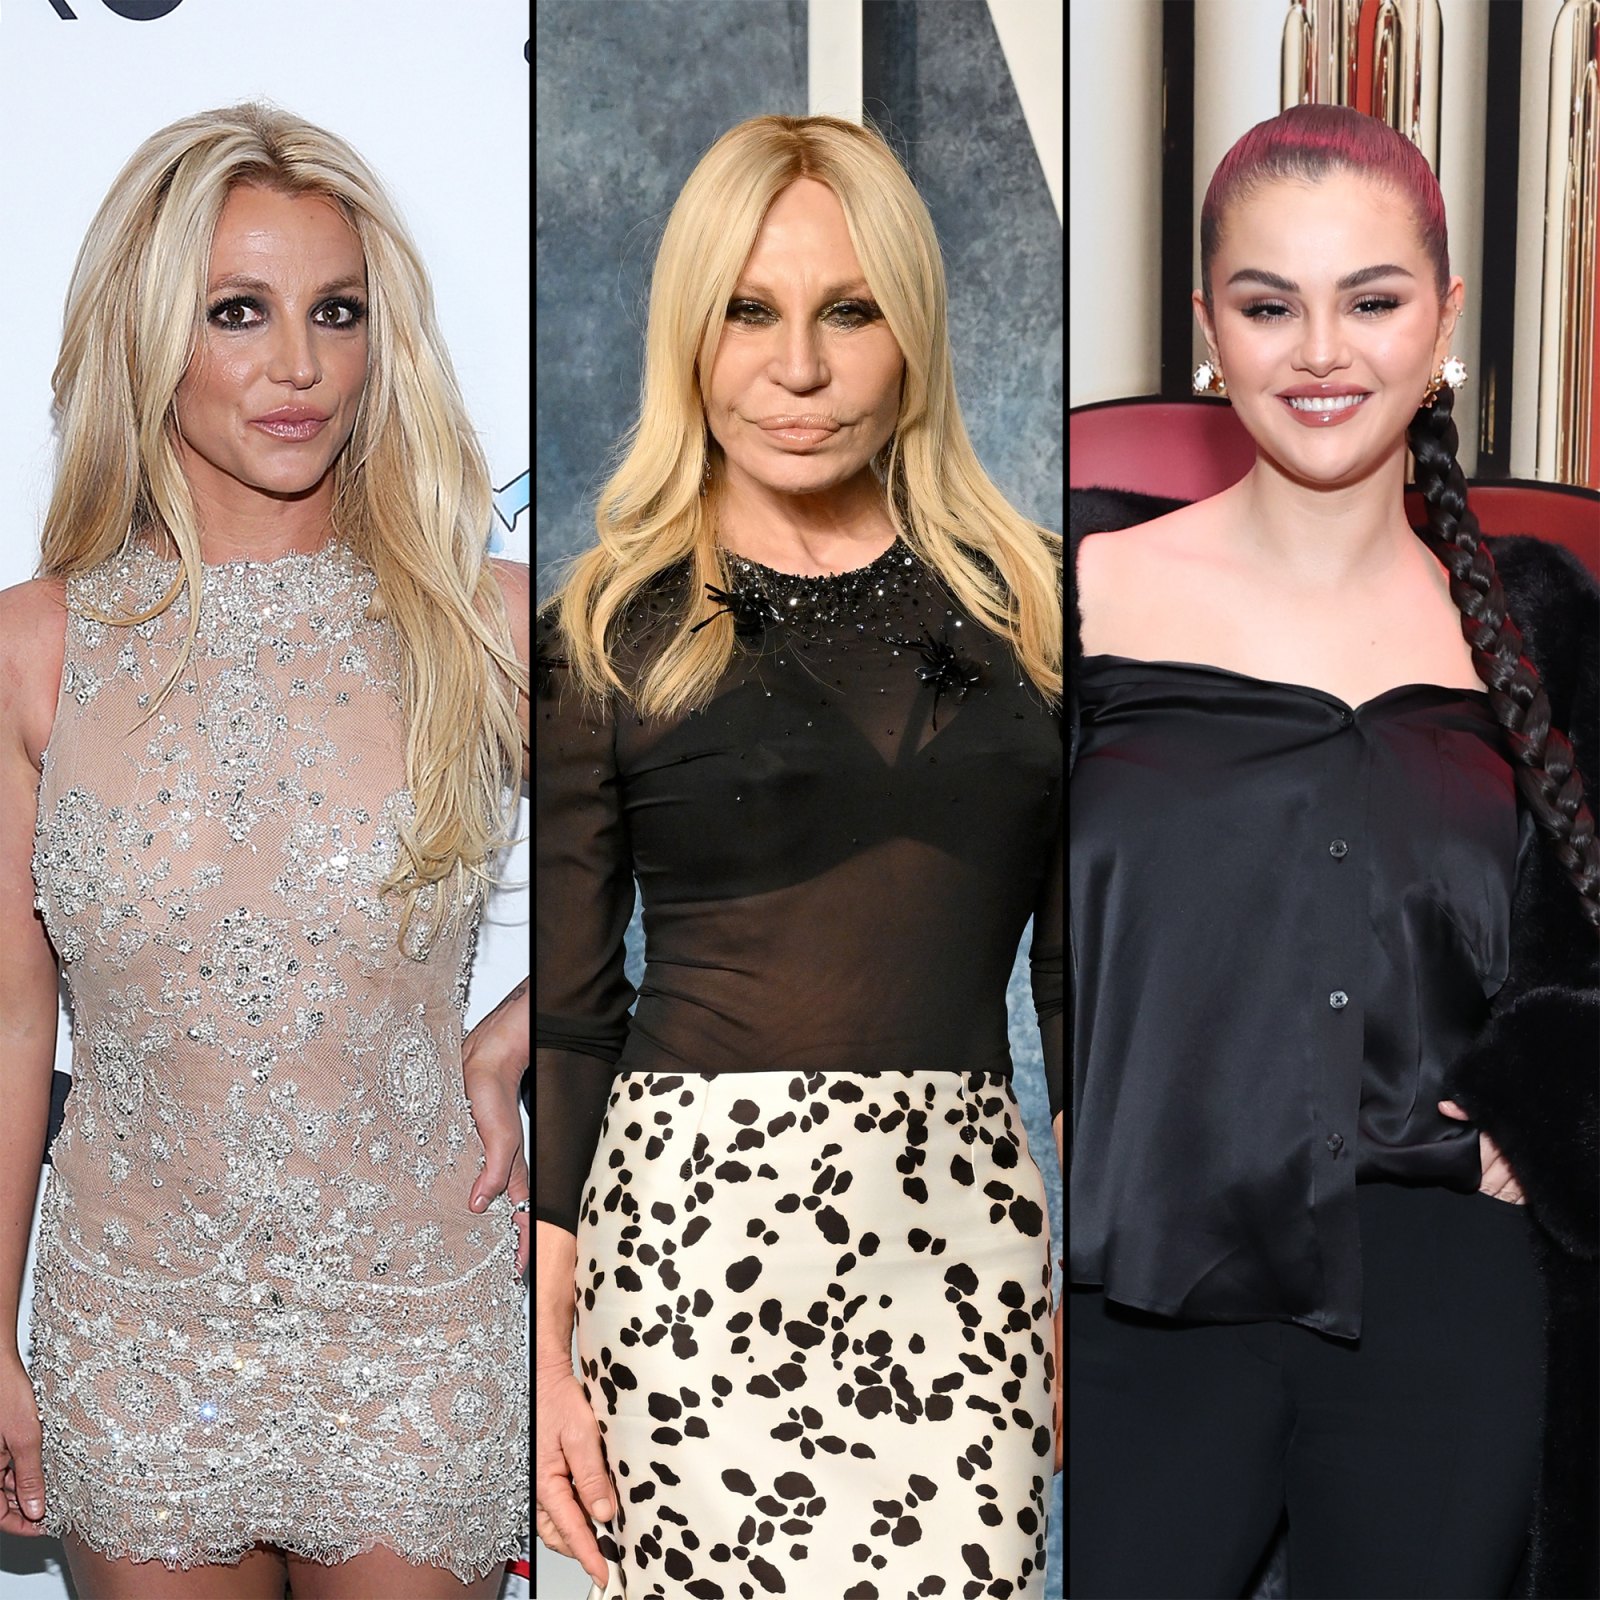 Britney Spears Inner Circle- Donatella Versace and More People Who Are Close to the Star